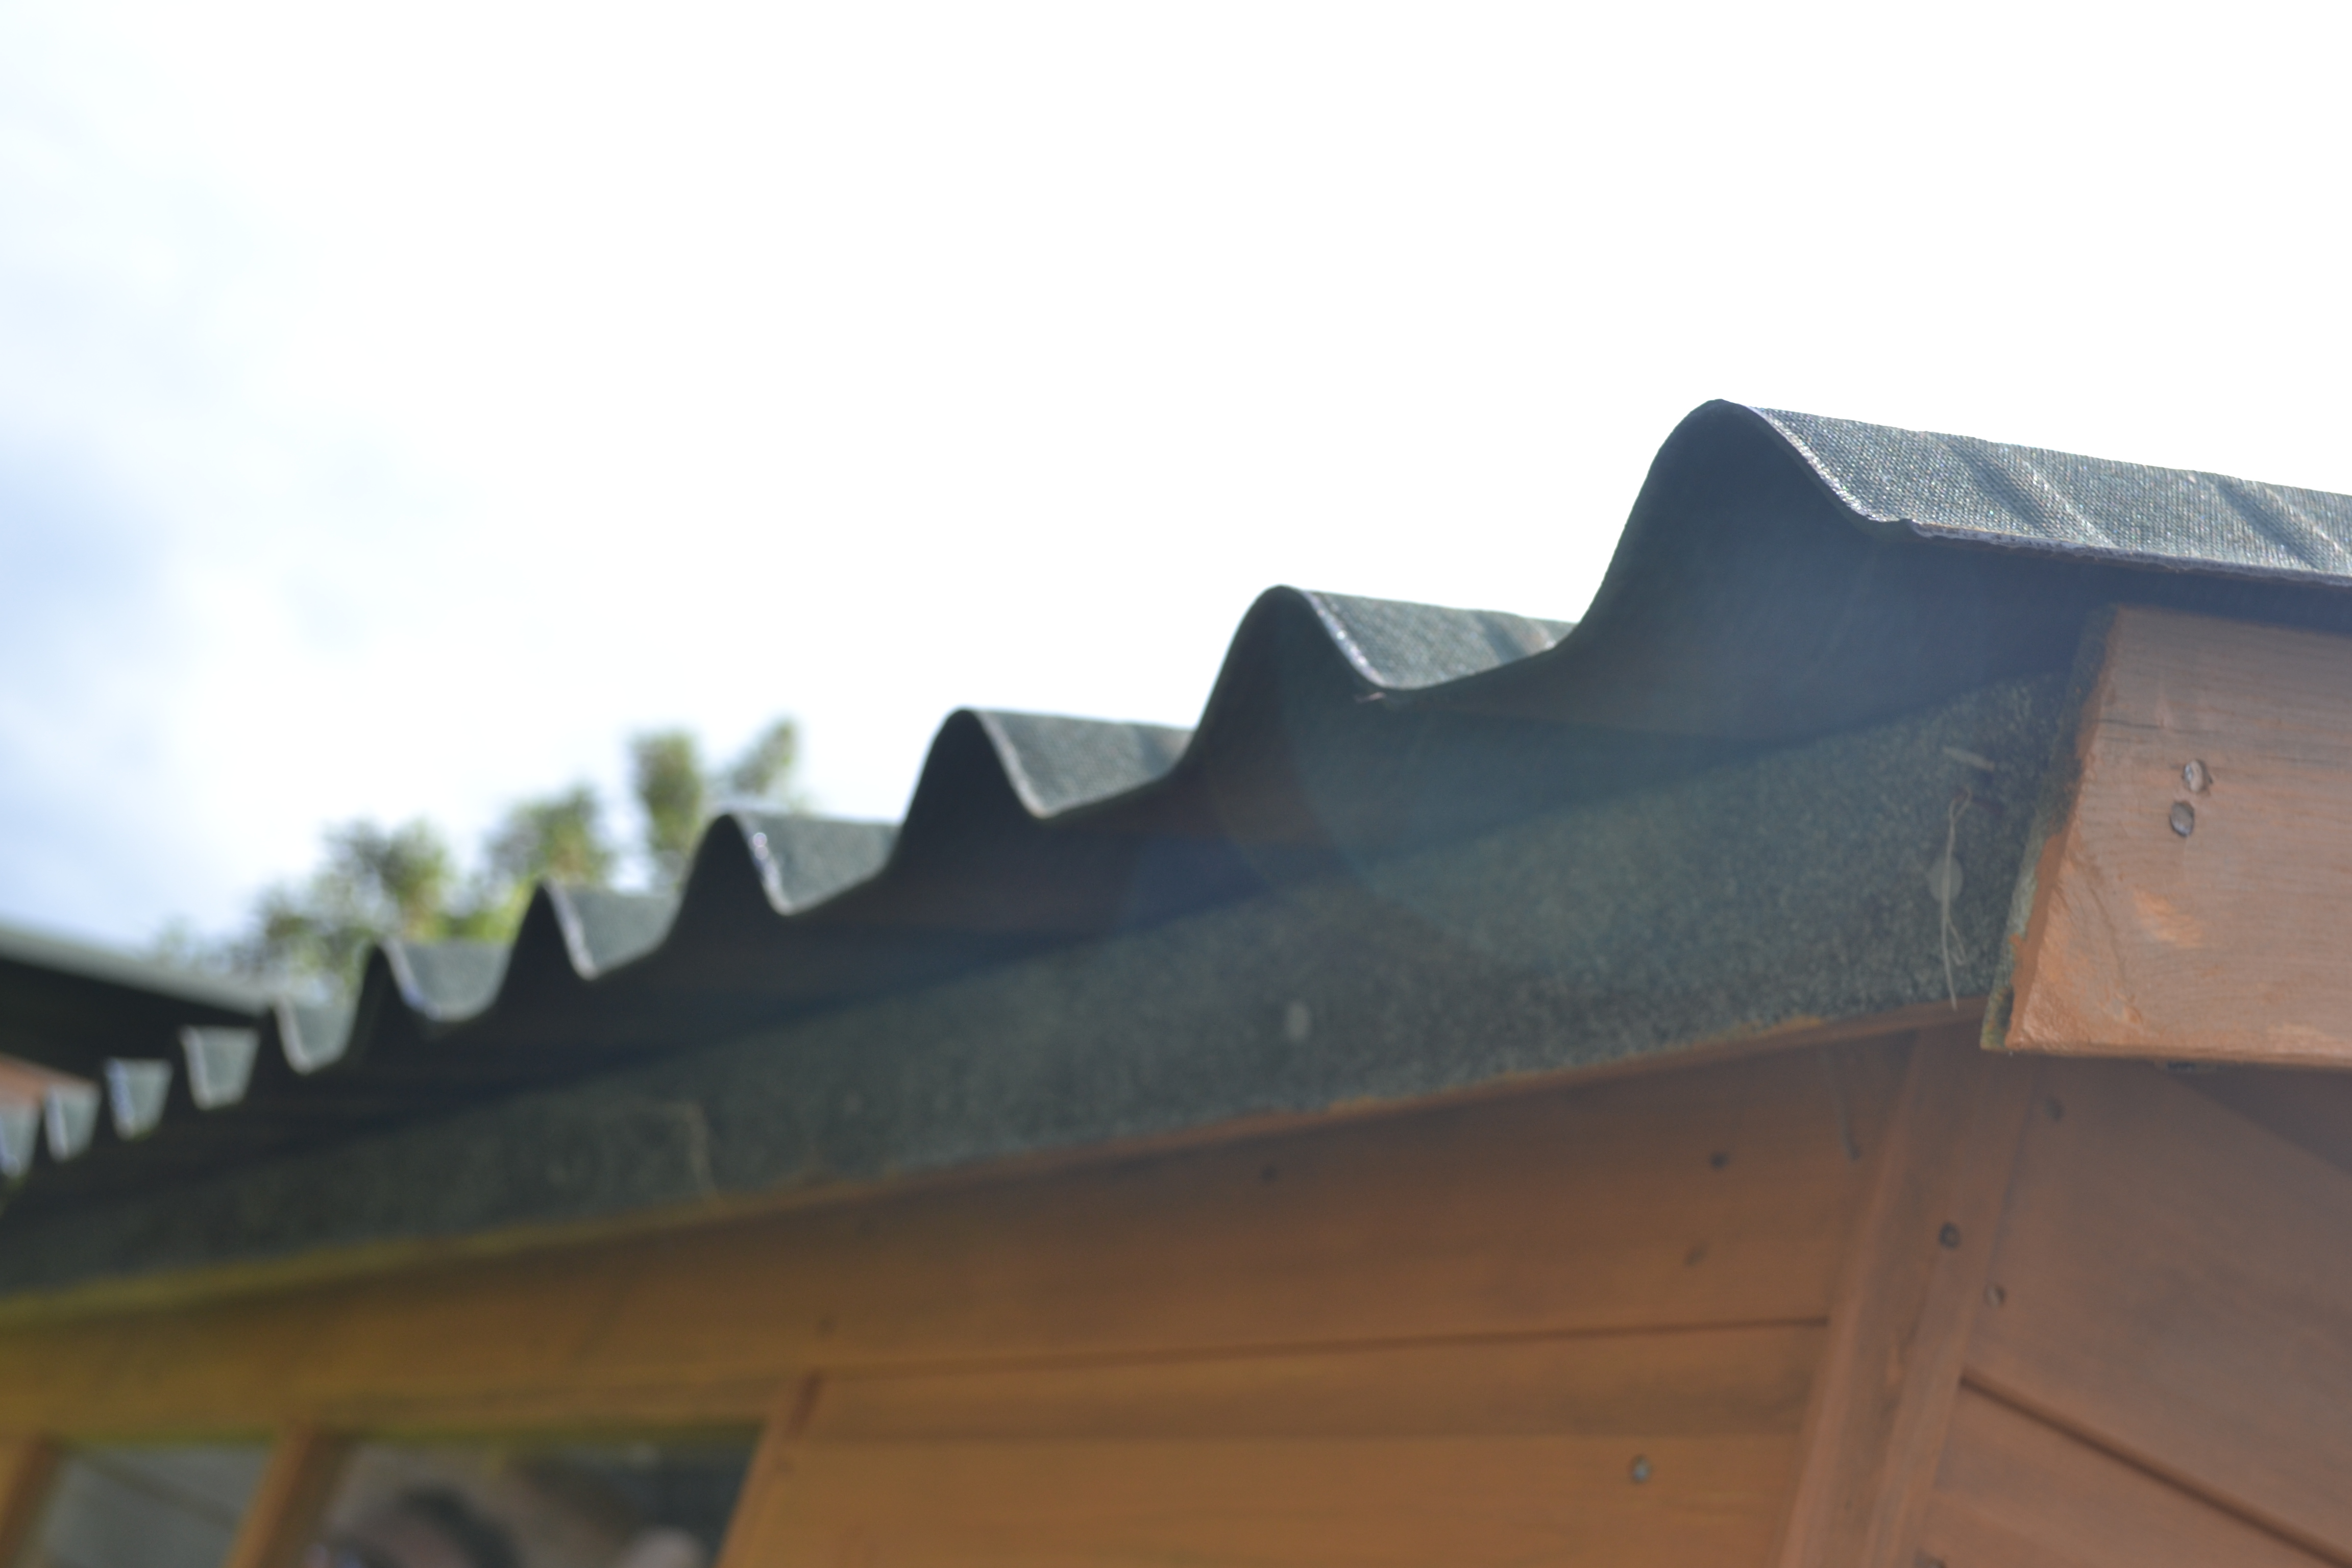 remove snow and ice from your shed roof to prevent damage